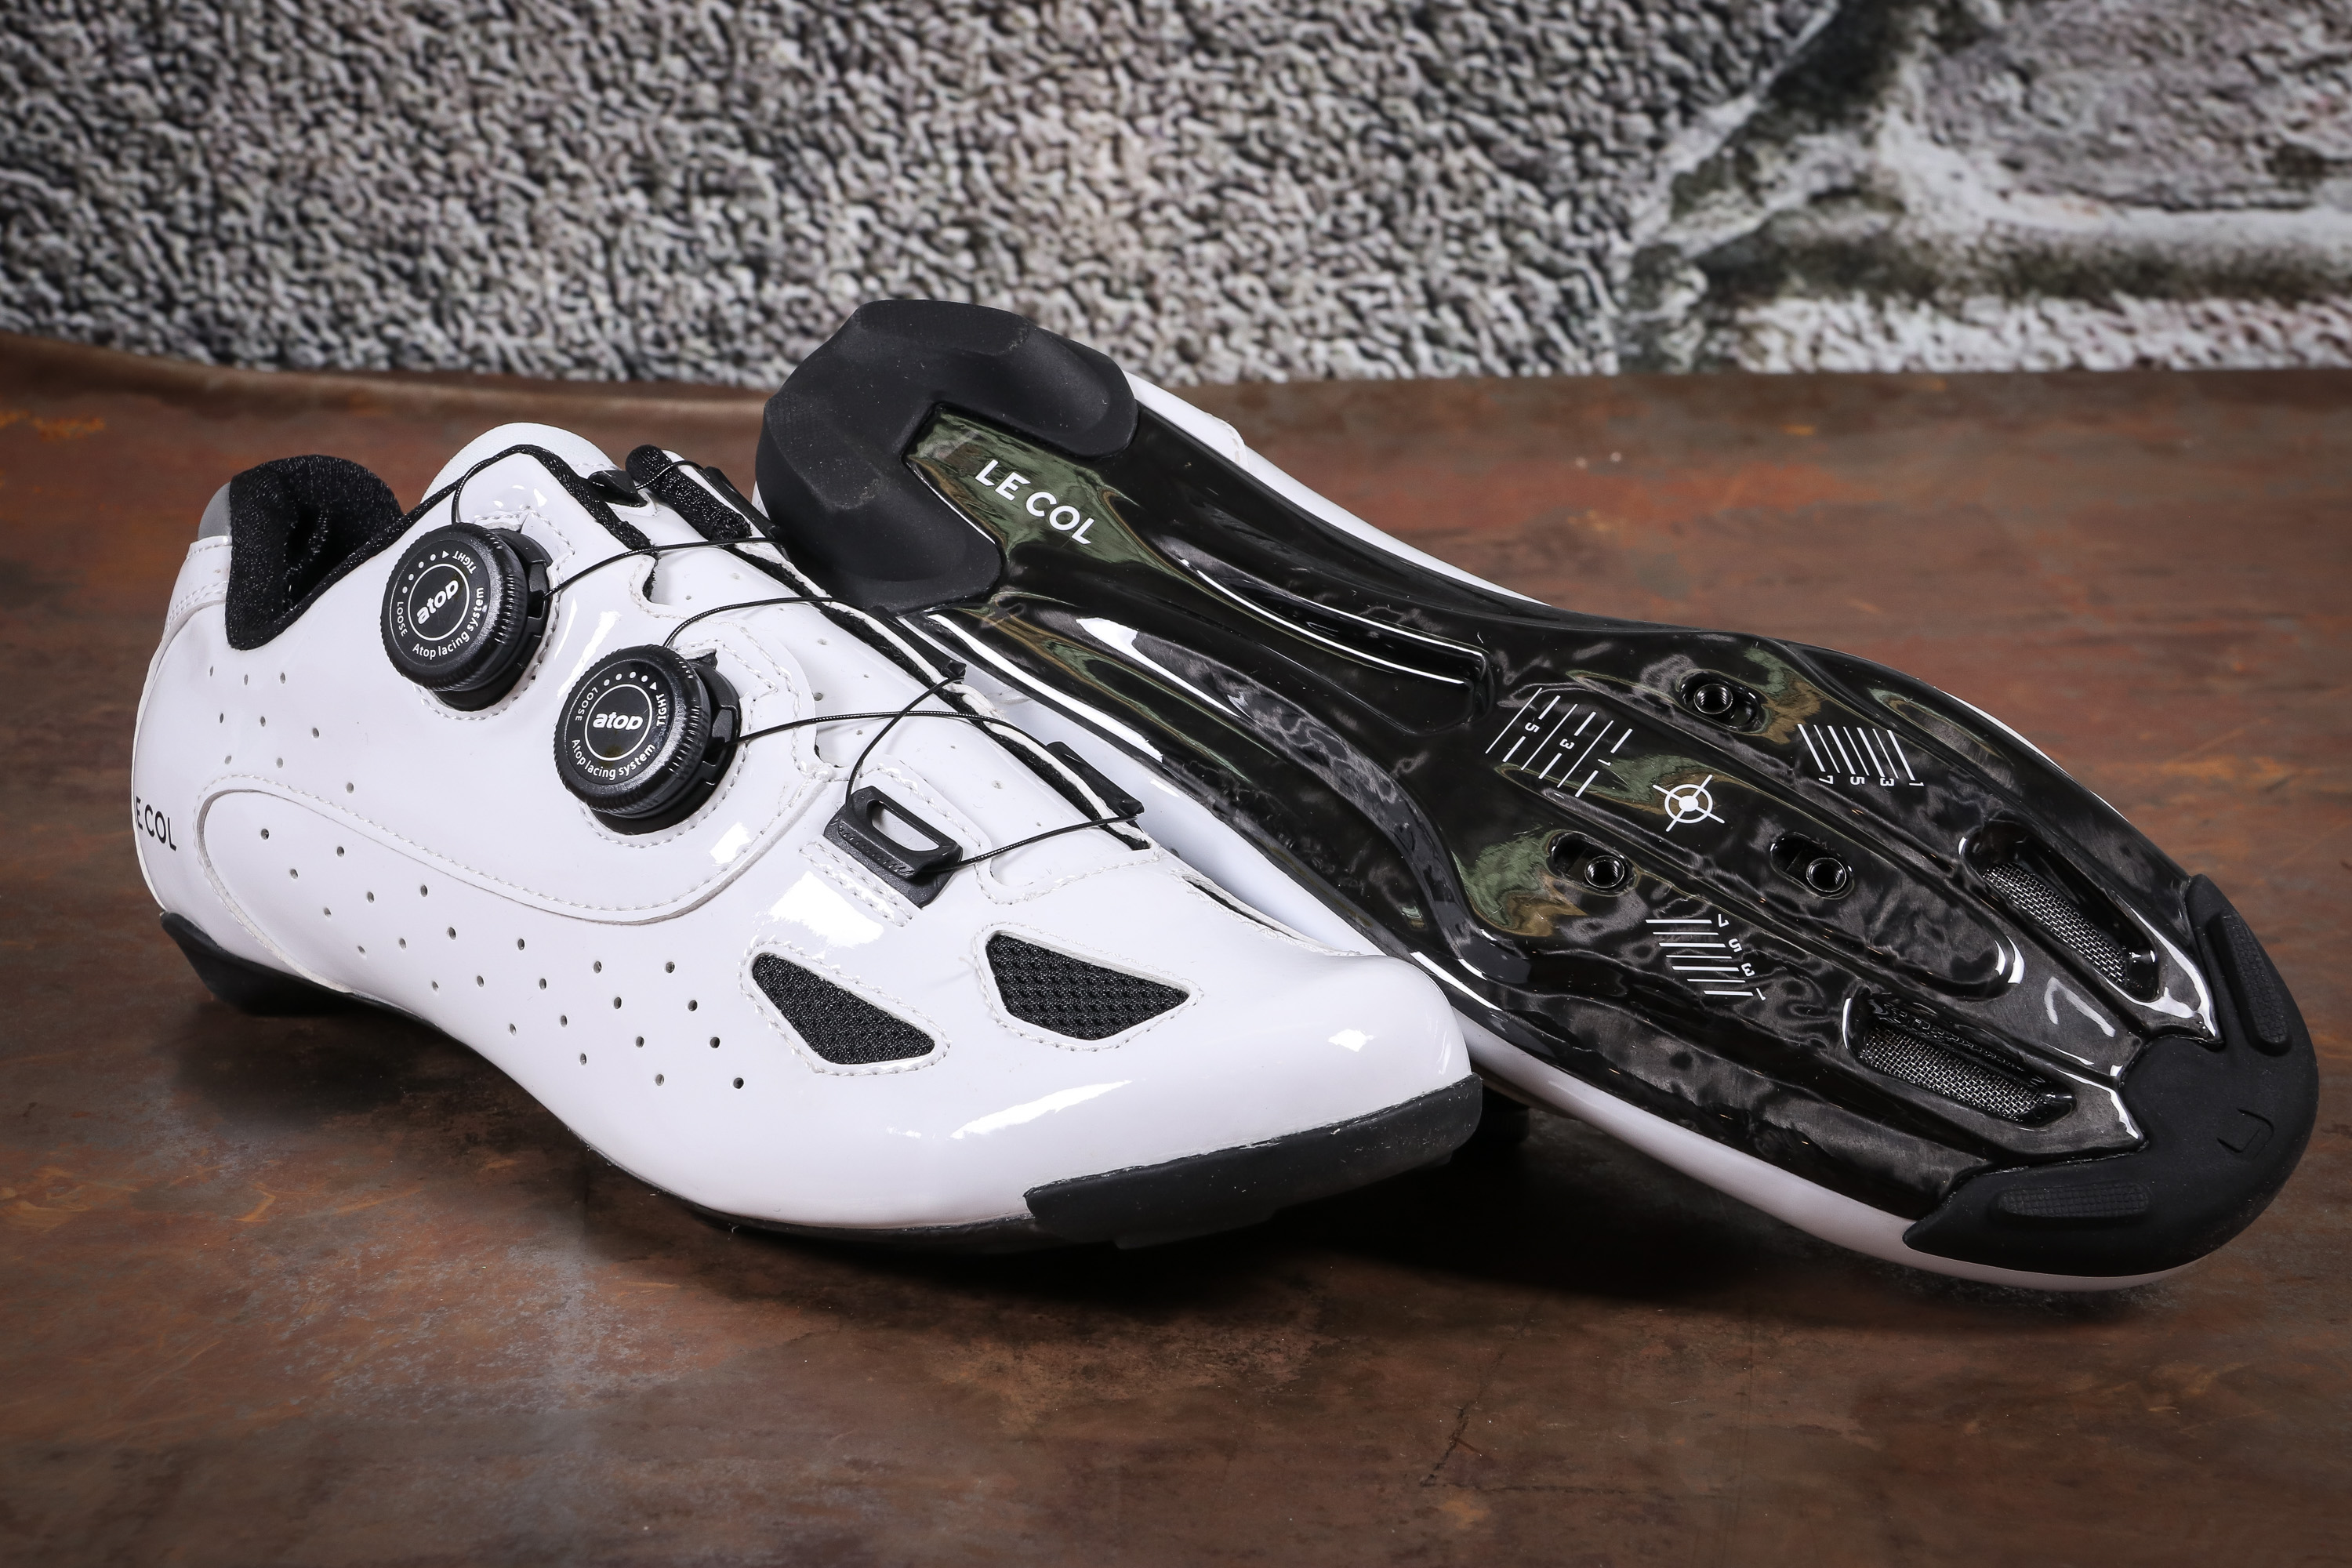 carbon cycling shoes